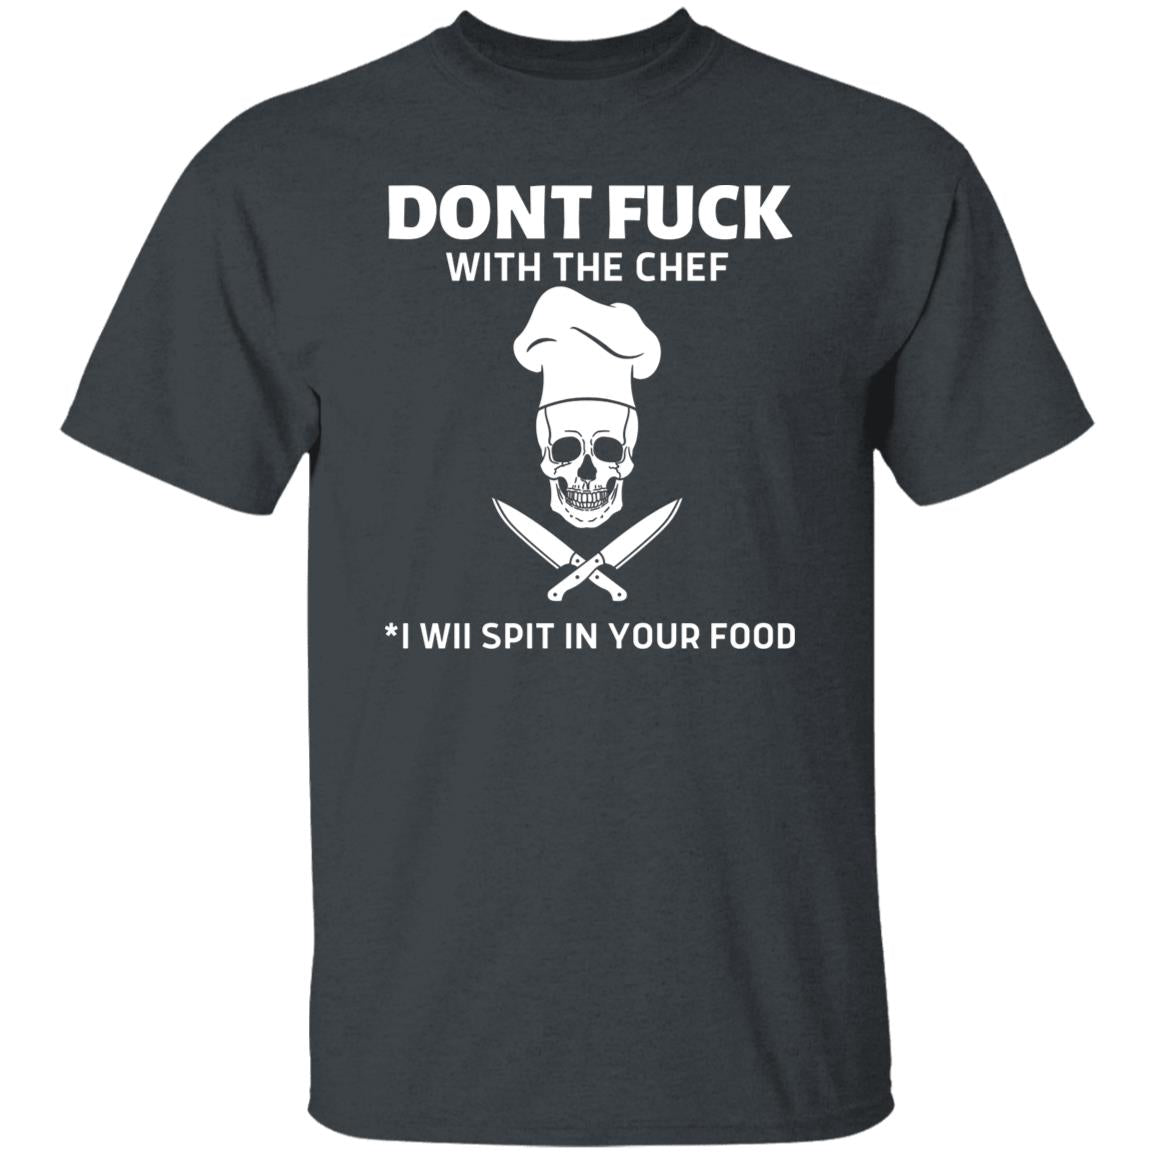 Don't Mess With The Chef T-Shirt, Funny Sarcastic Chef Home Cook Grilling Shirt, Weekend Grill BBQ T-shirt